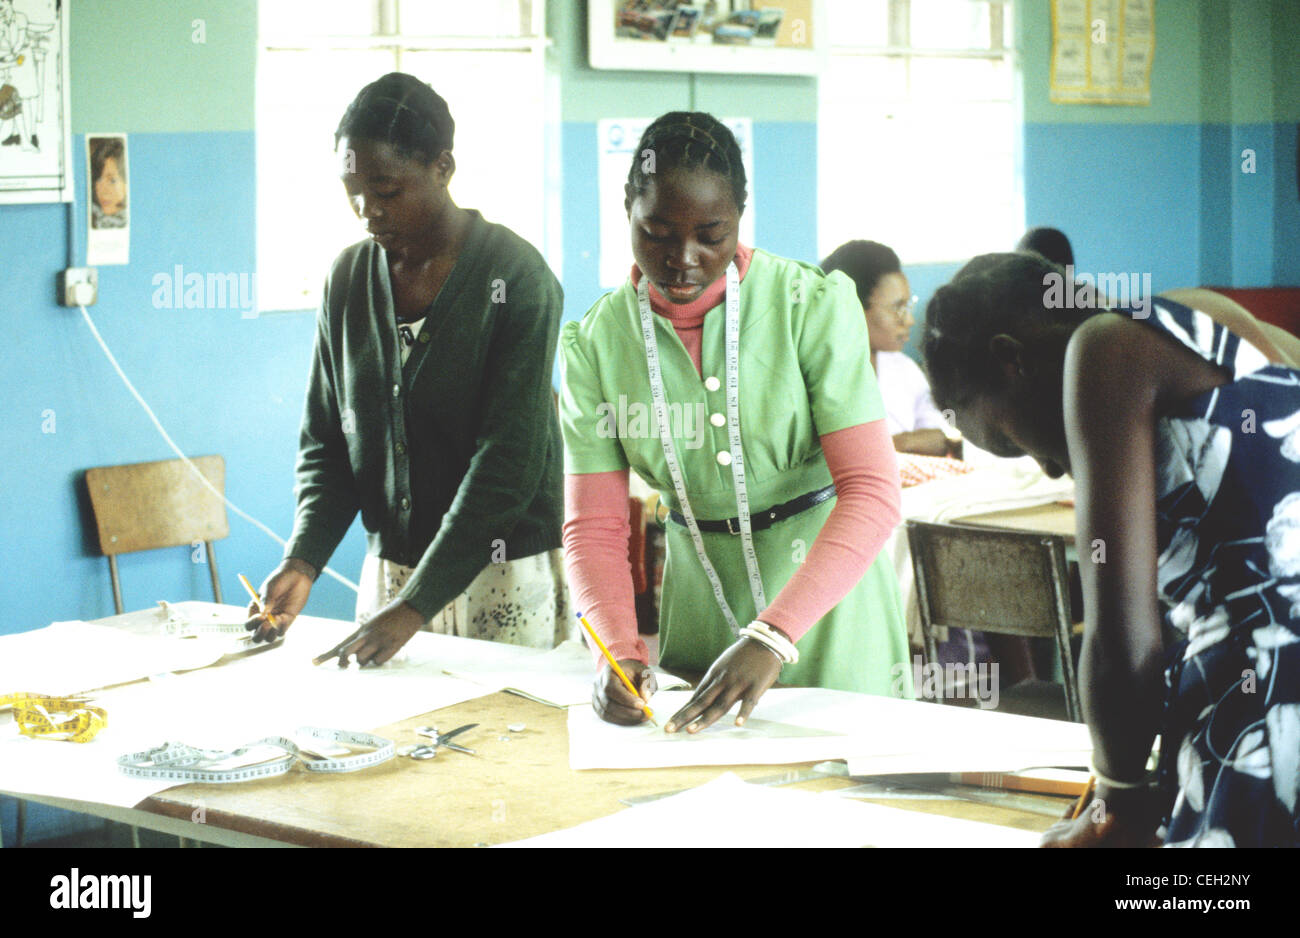 Dress making skills are thought in a Zambian school Stock Photo